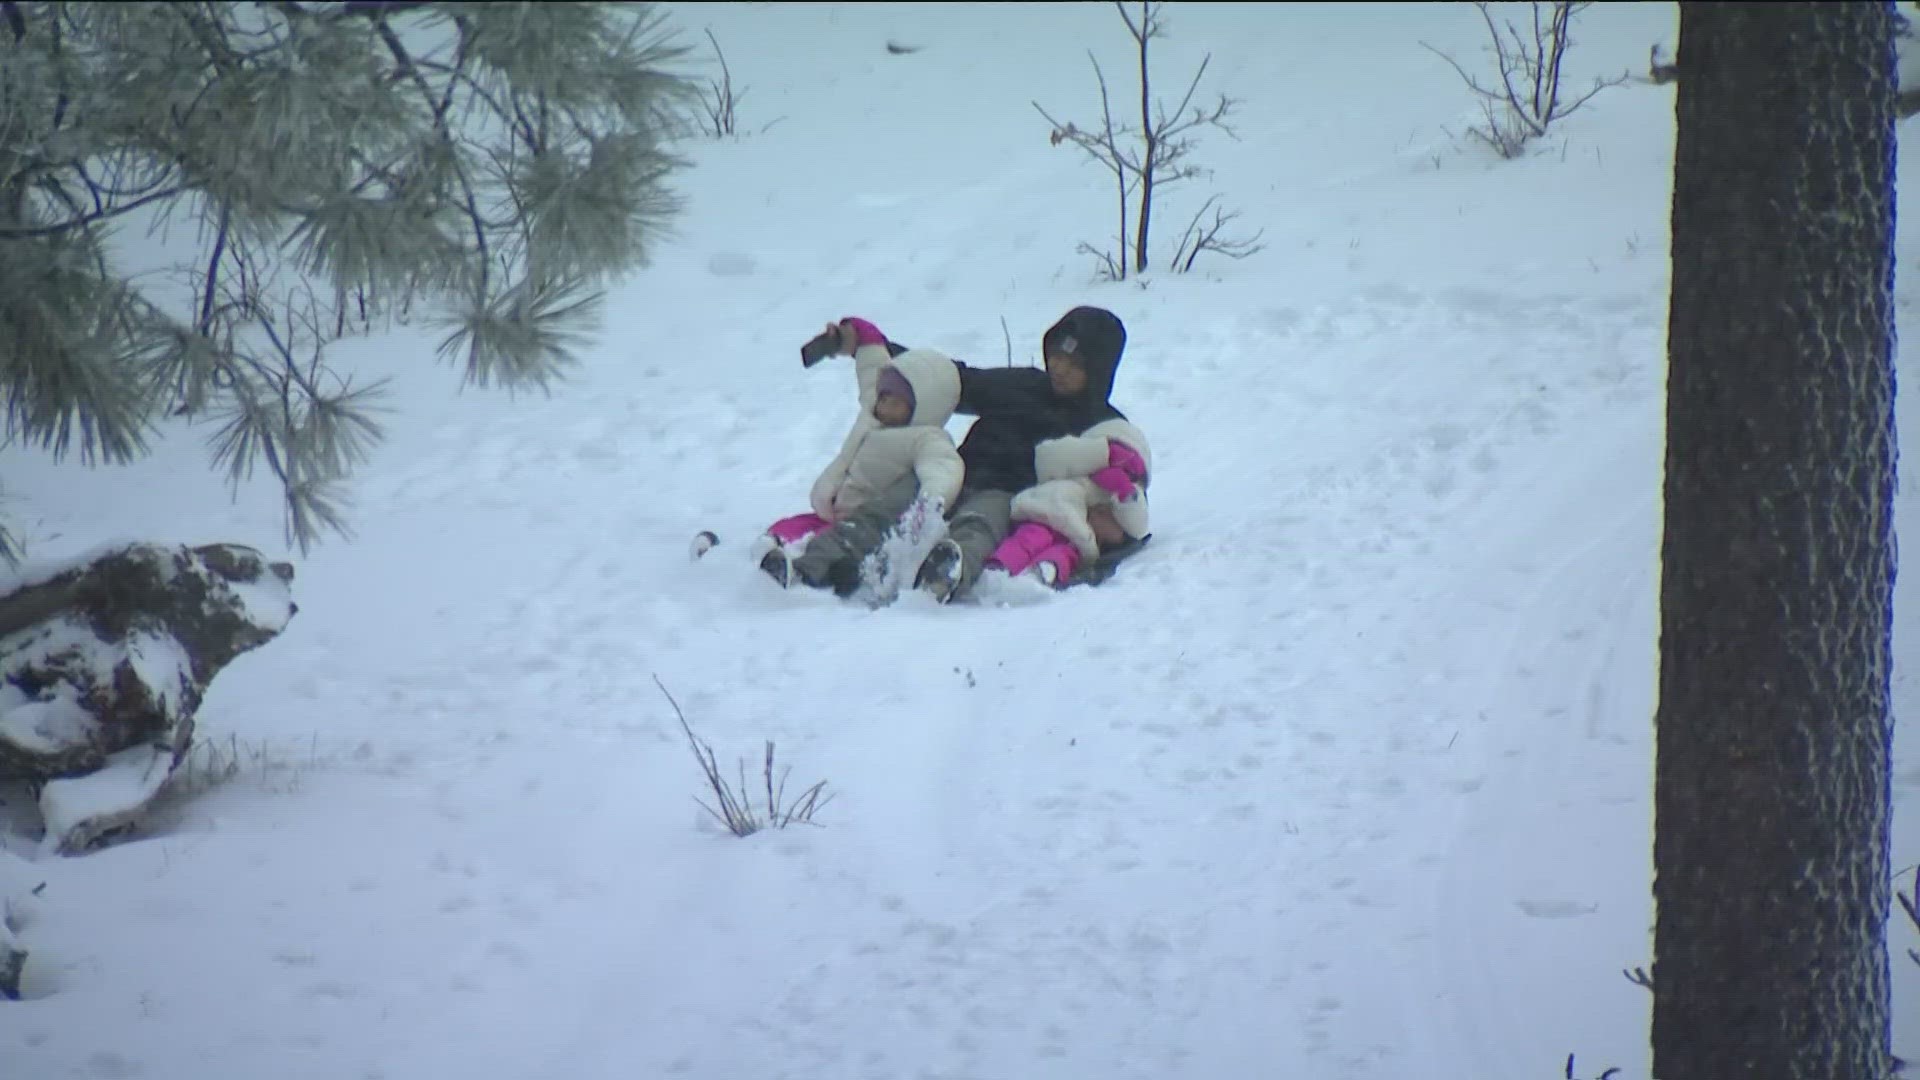 San Diego families traveled to Mount Laguna on Friday to play in the snow. It's expected to stick through Saturday as cold temperatures remain.